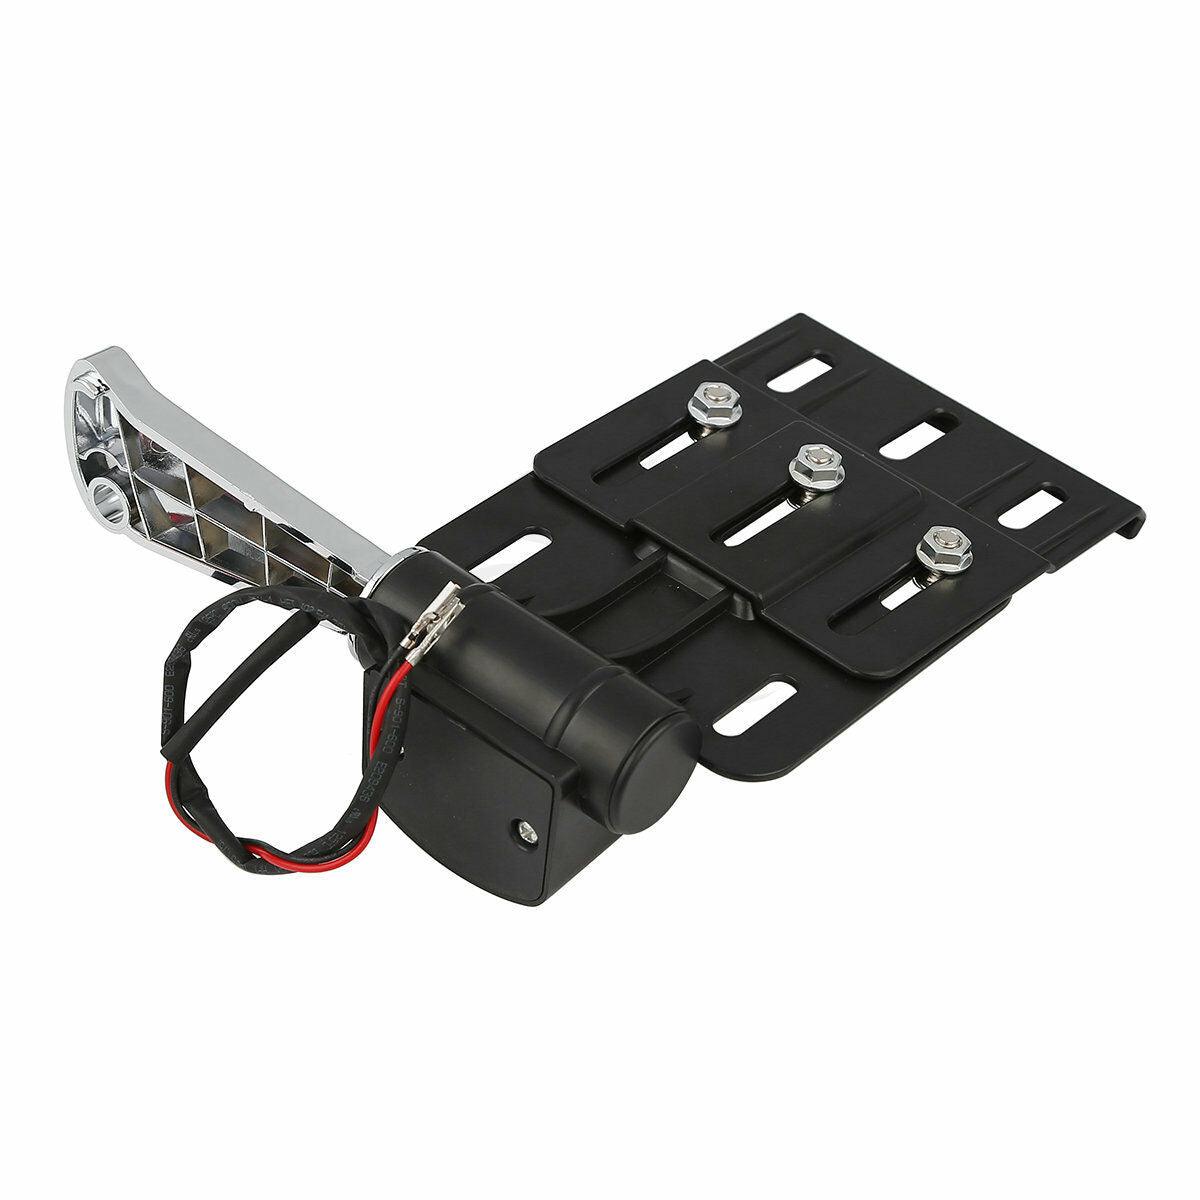 Motor LED Light Side Mount License Plate Fit For Harley Sportster XL 1200 XL883N - Moto Life Products